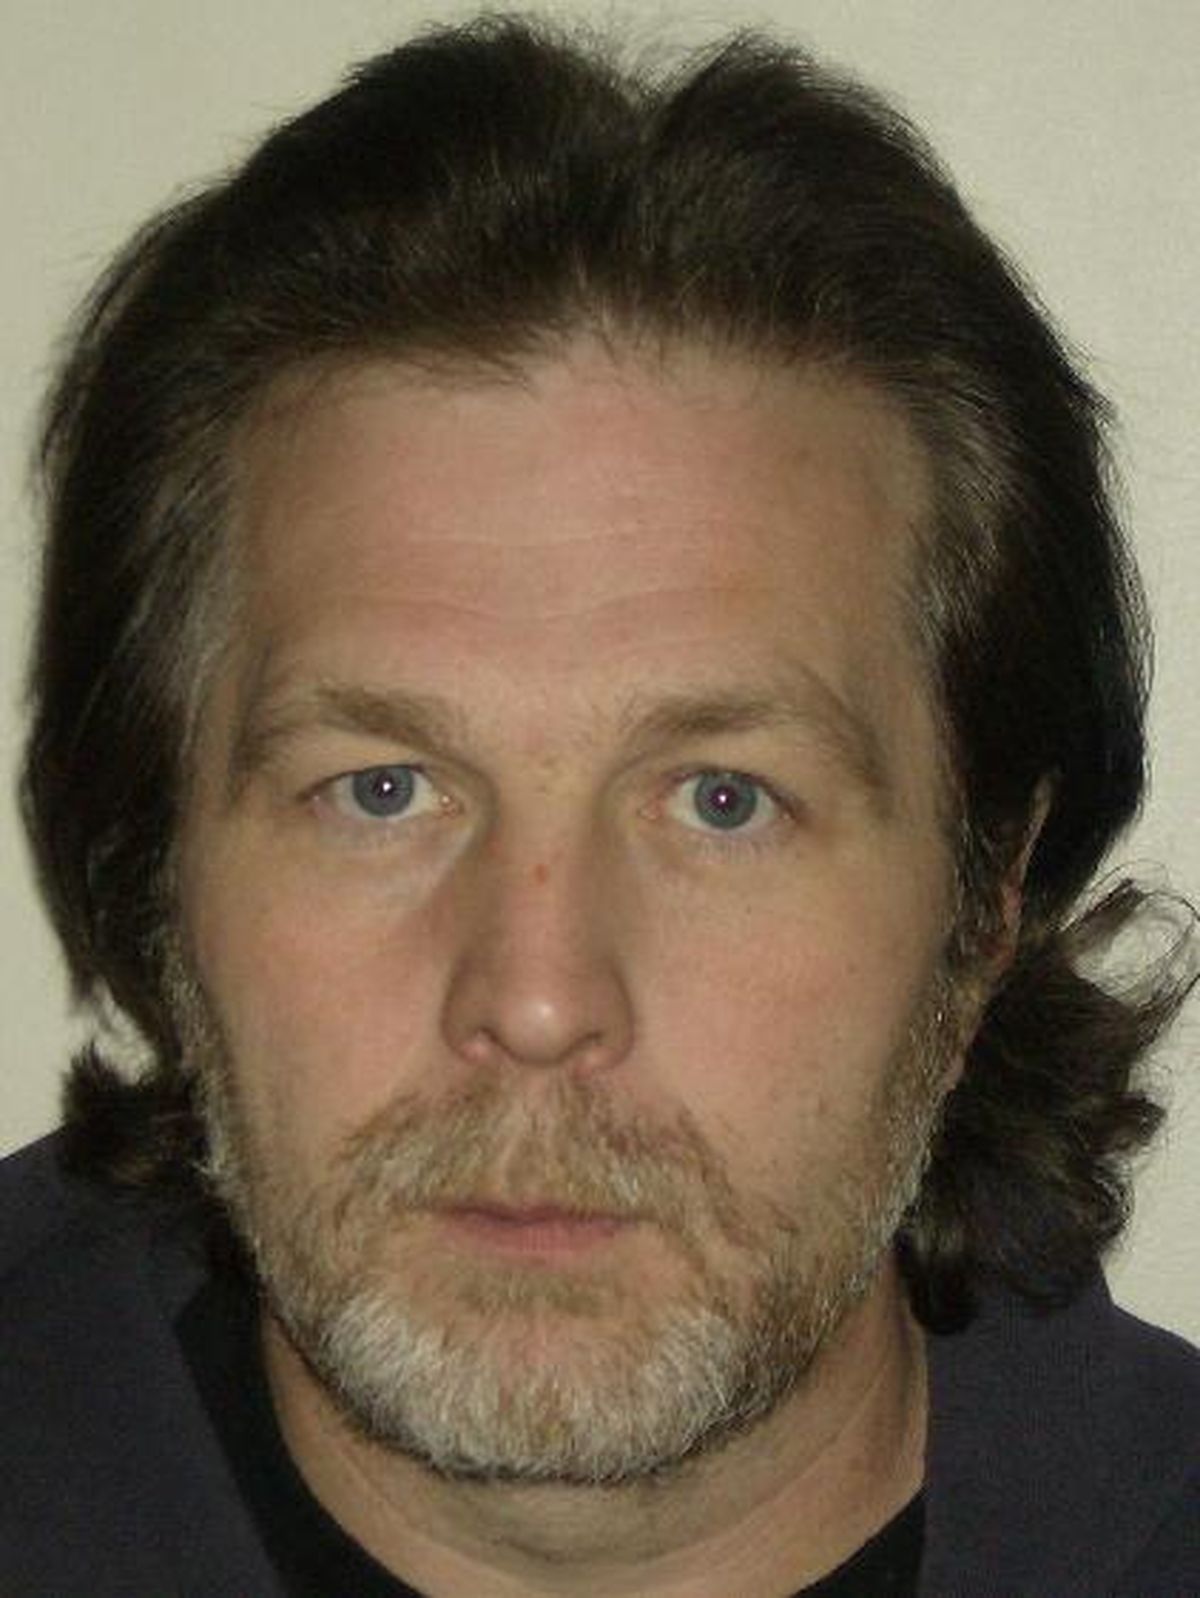 Police are looking for Phillip Arnold Paul, 47, after he walked away from an Eastern State Hospital field trip at Spokane County Interstate Fair on Thursday, Sept. 17, 2009. He is considered dangerous. (Courtesy of Spokane County Sheriff